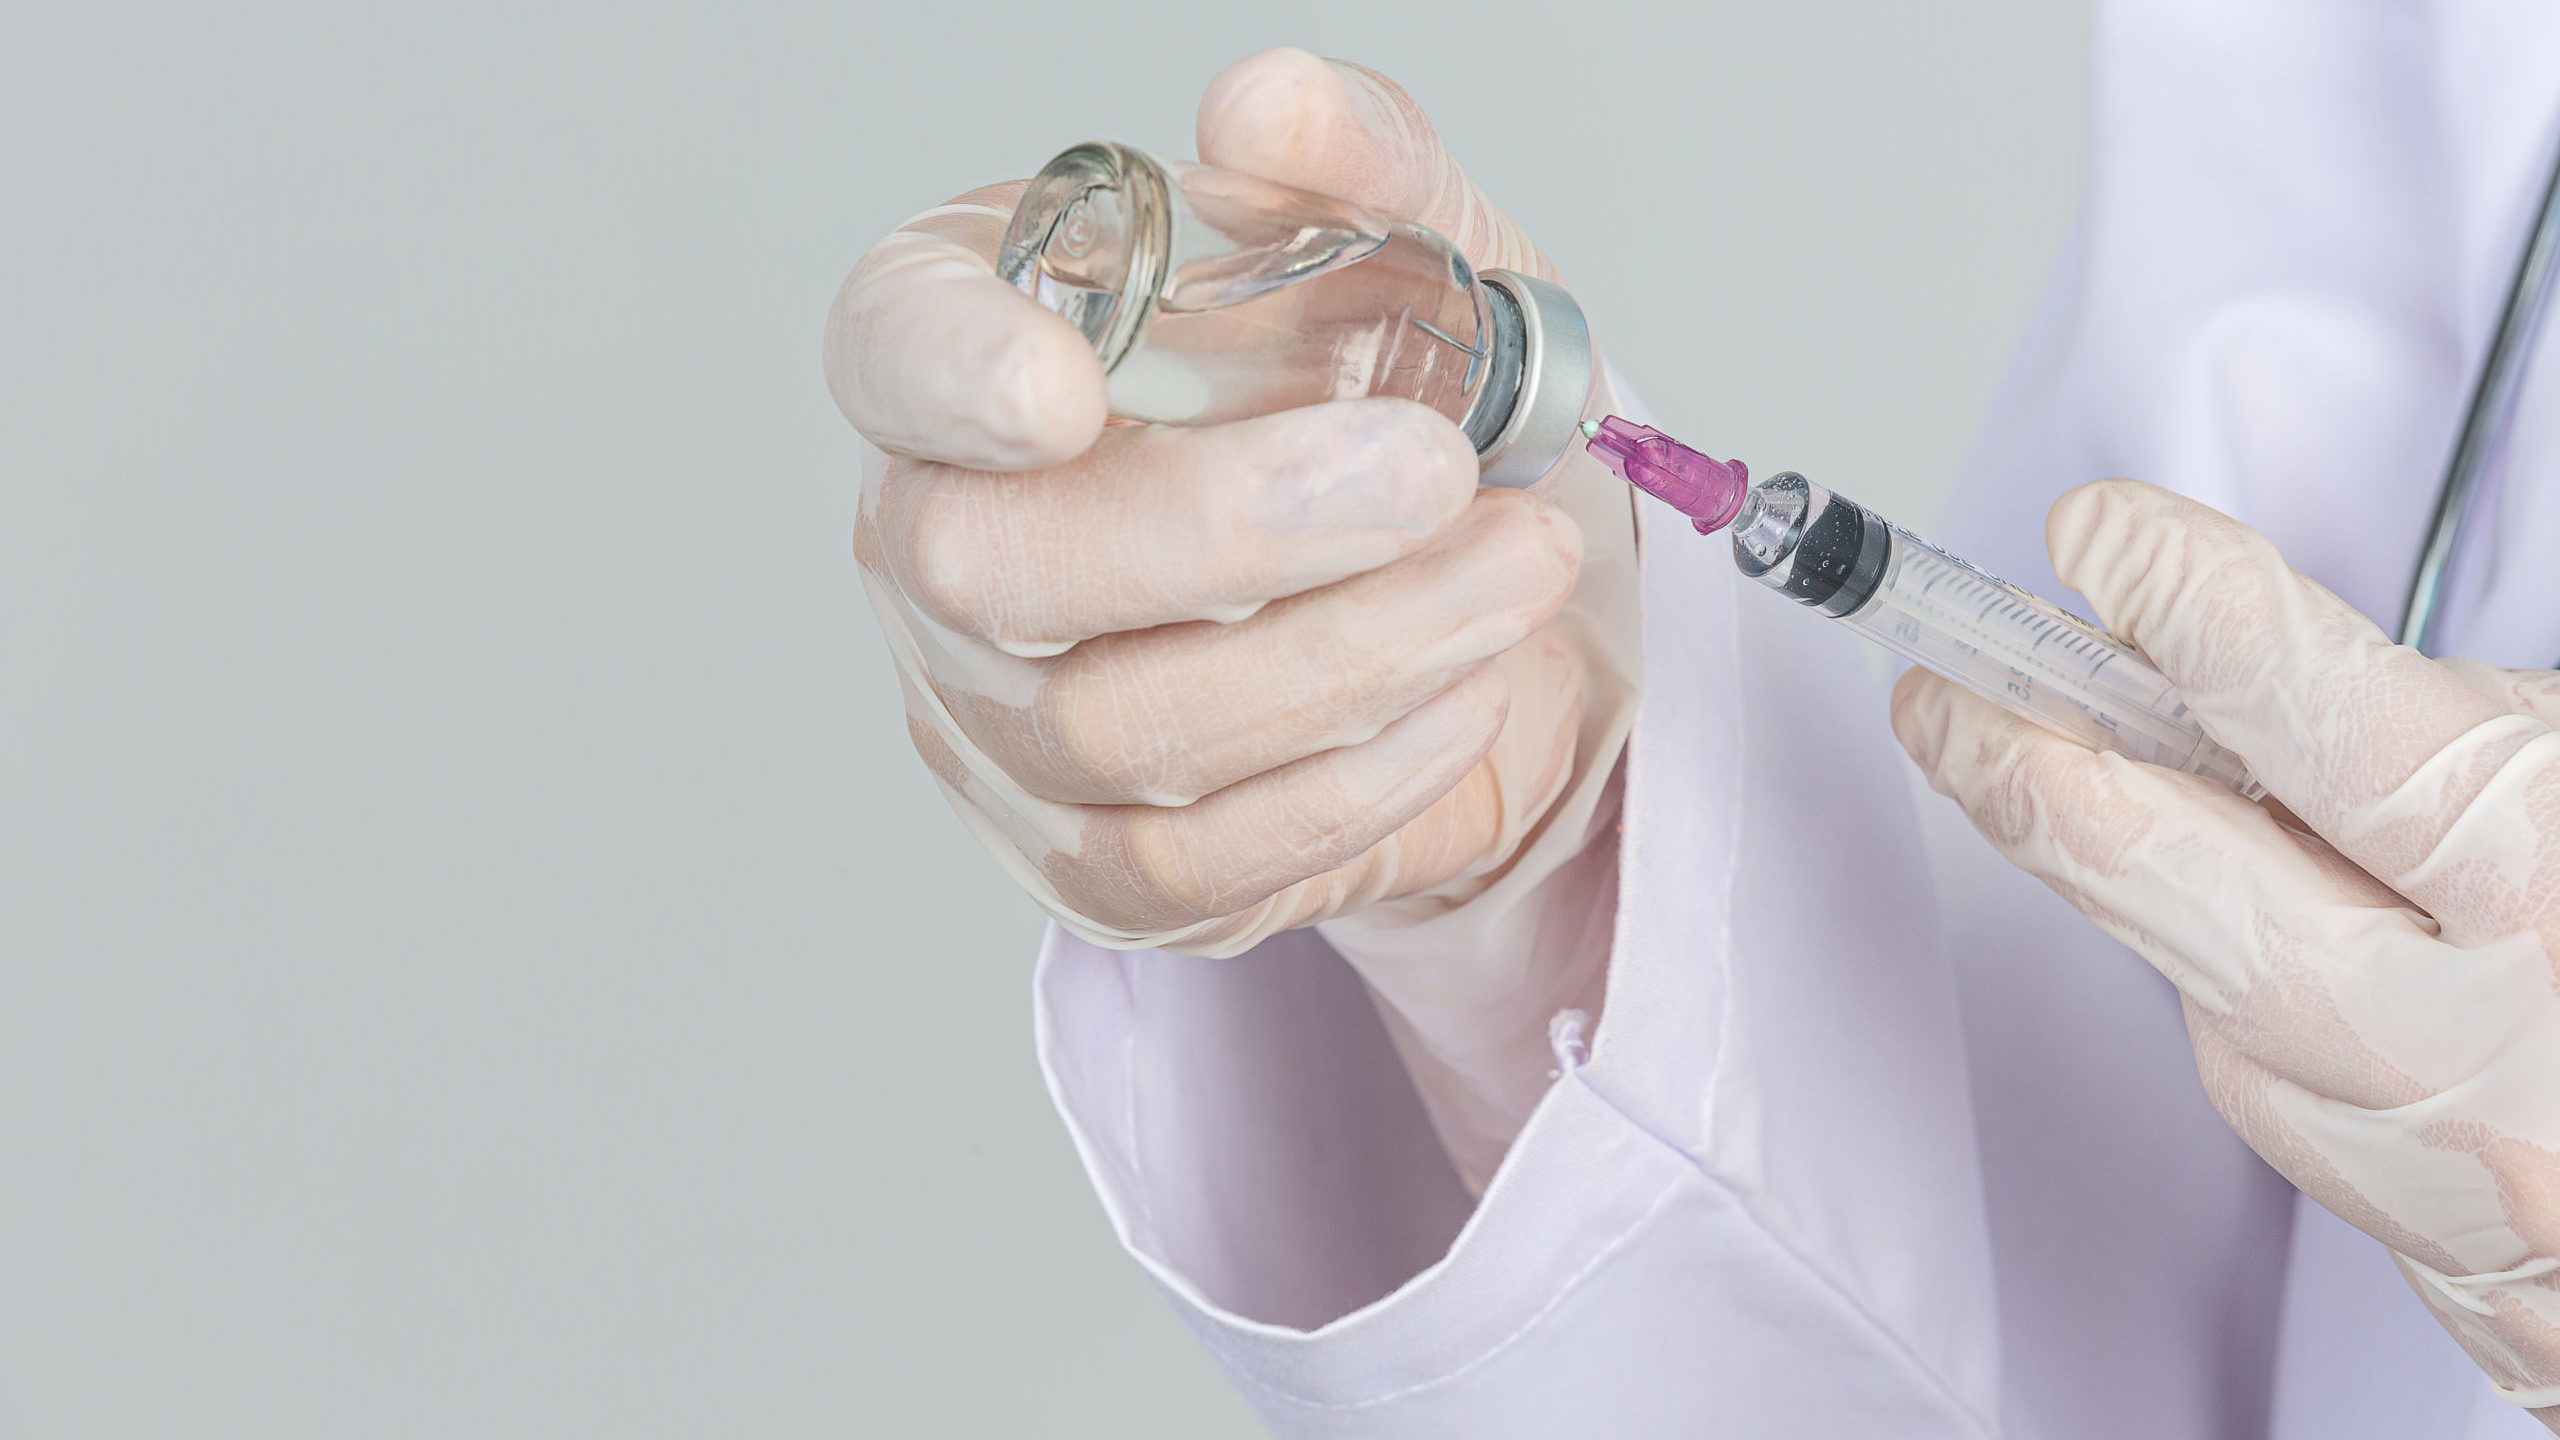 Israel Projects COVID-19 Vaccine by Next Summer